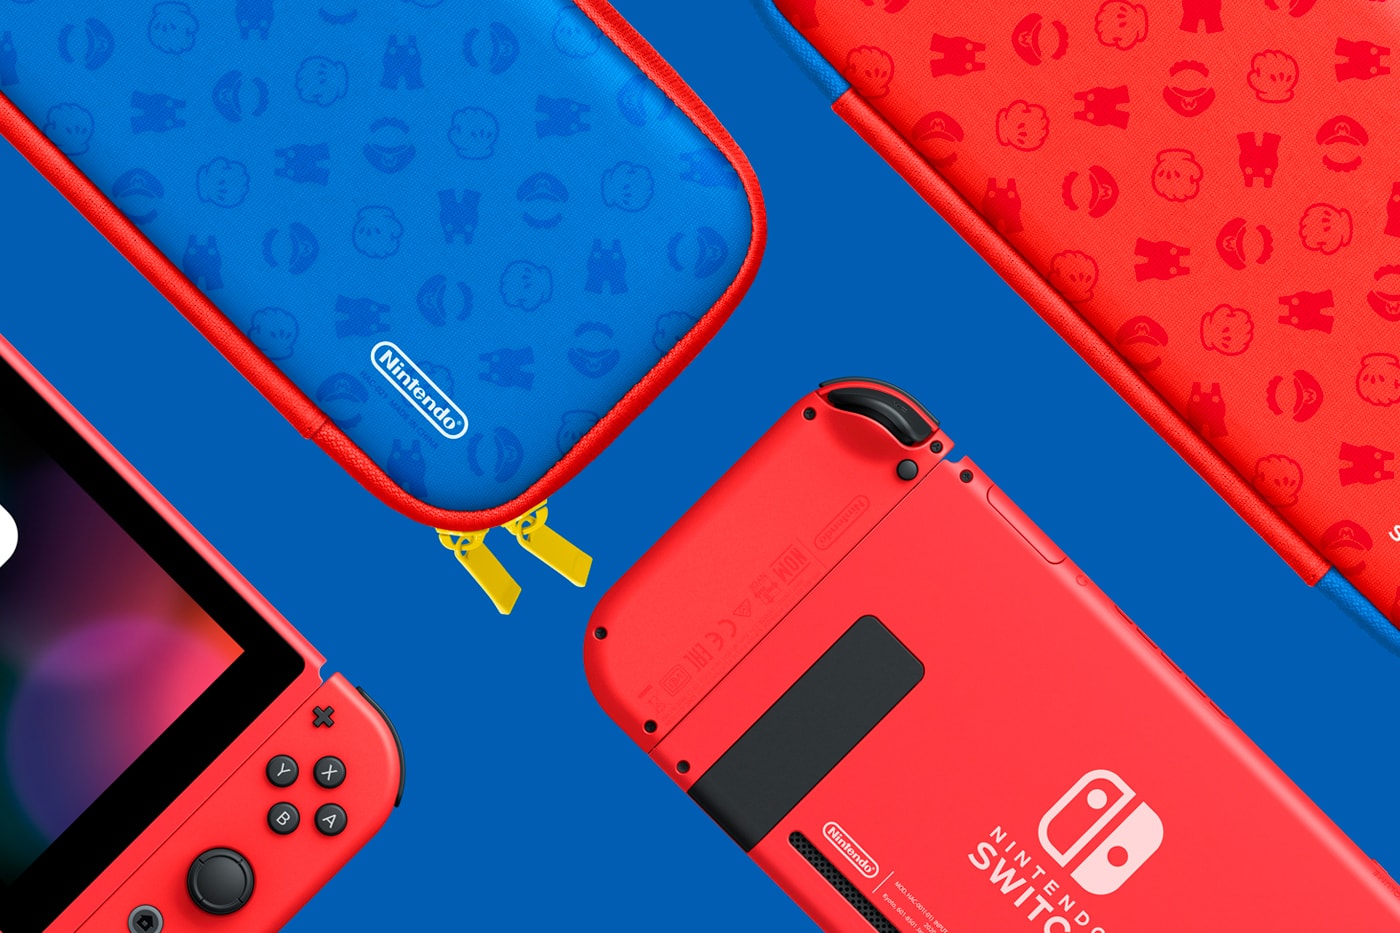 Nintendo 35 anniversary Super Mario Bros limited Edition Switch Set controllers joy cons console gaming red blue gold black